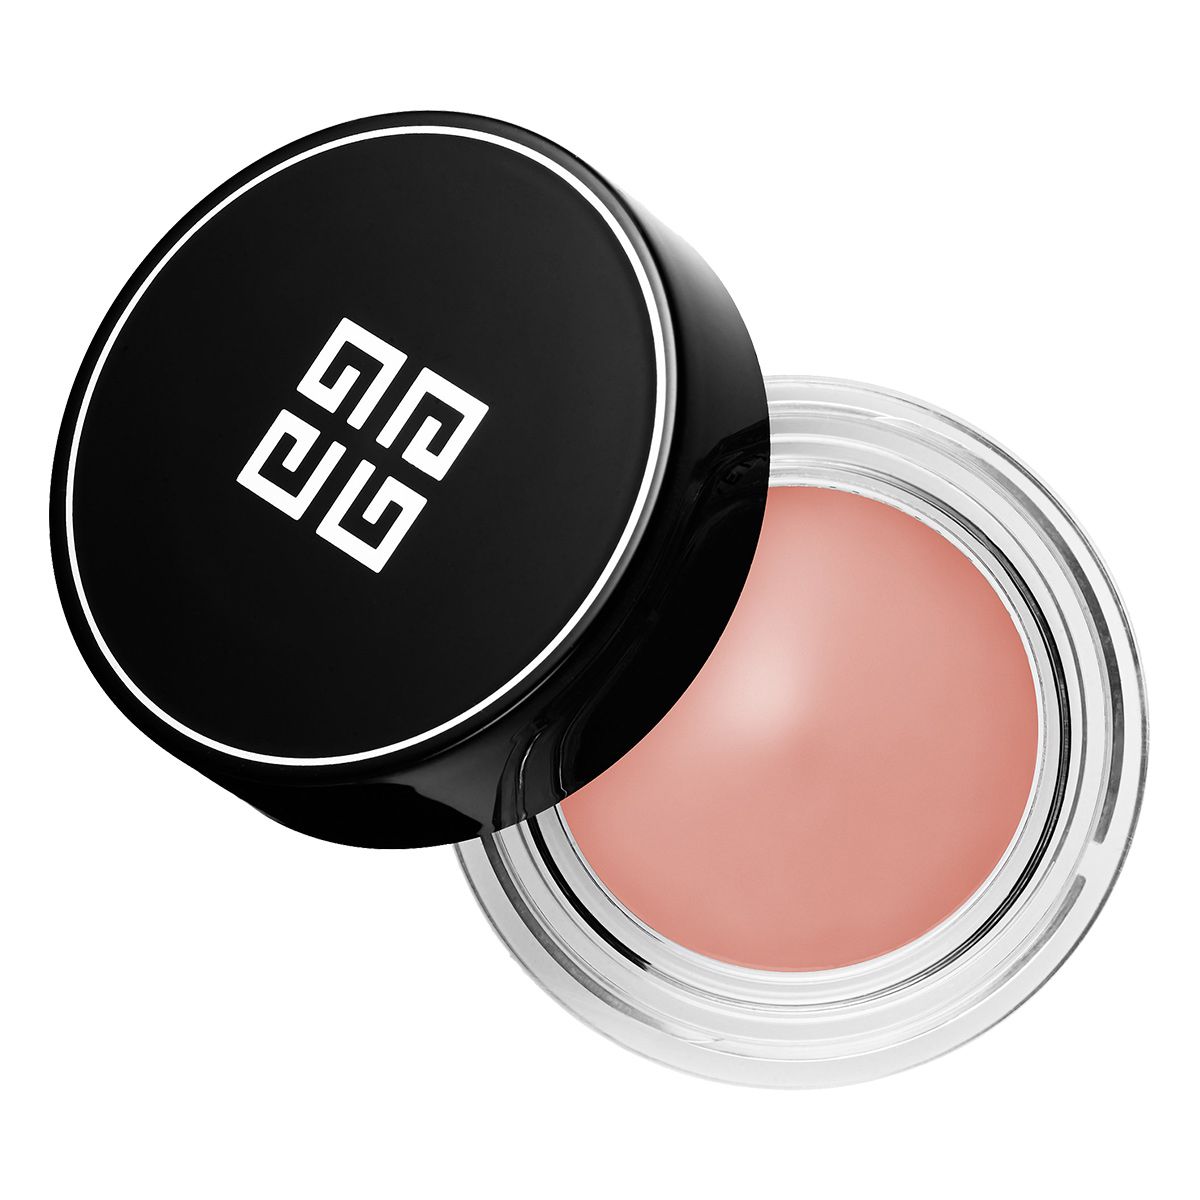 Givenchy Ombre Couture Cream Eyeshadow